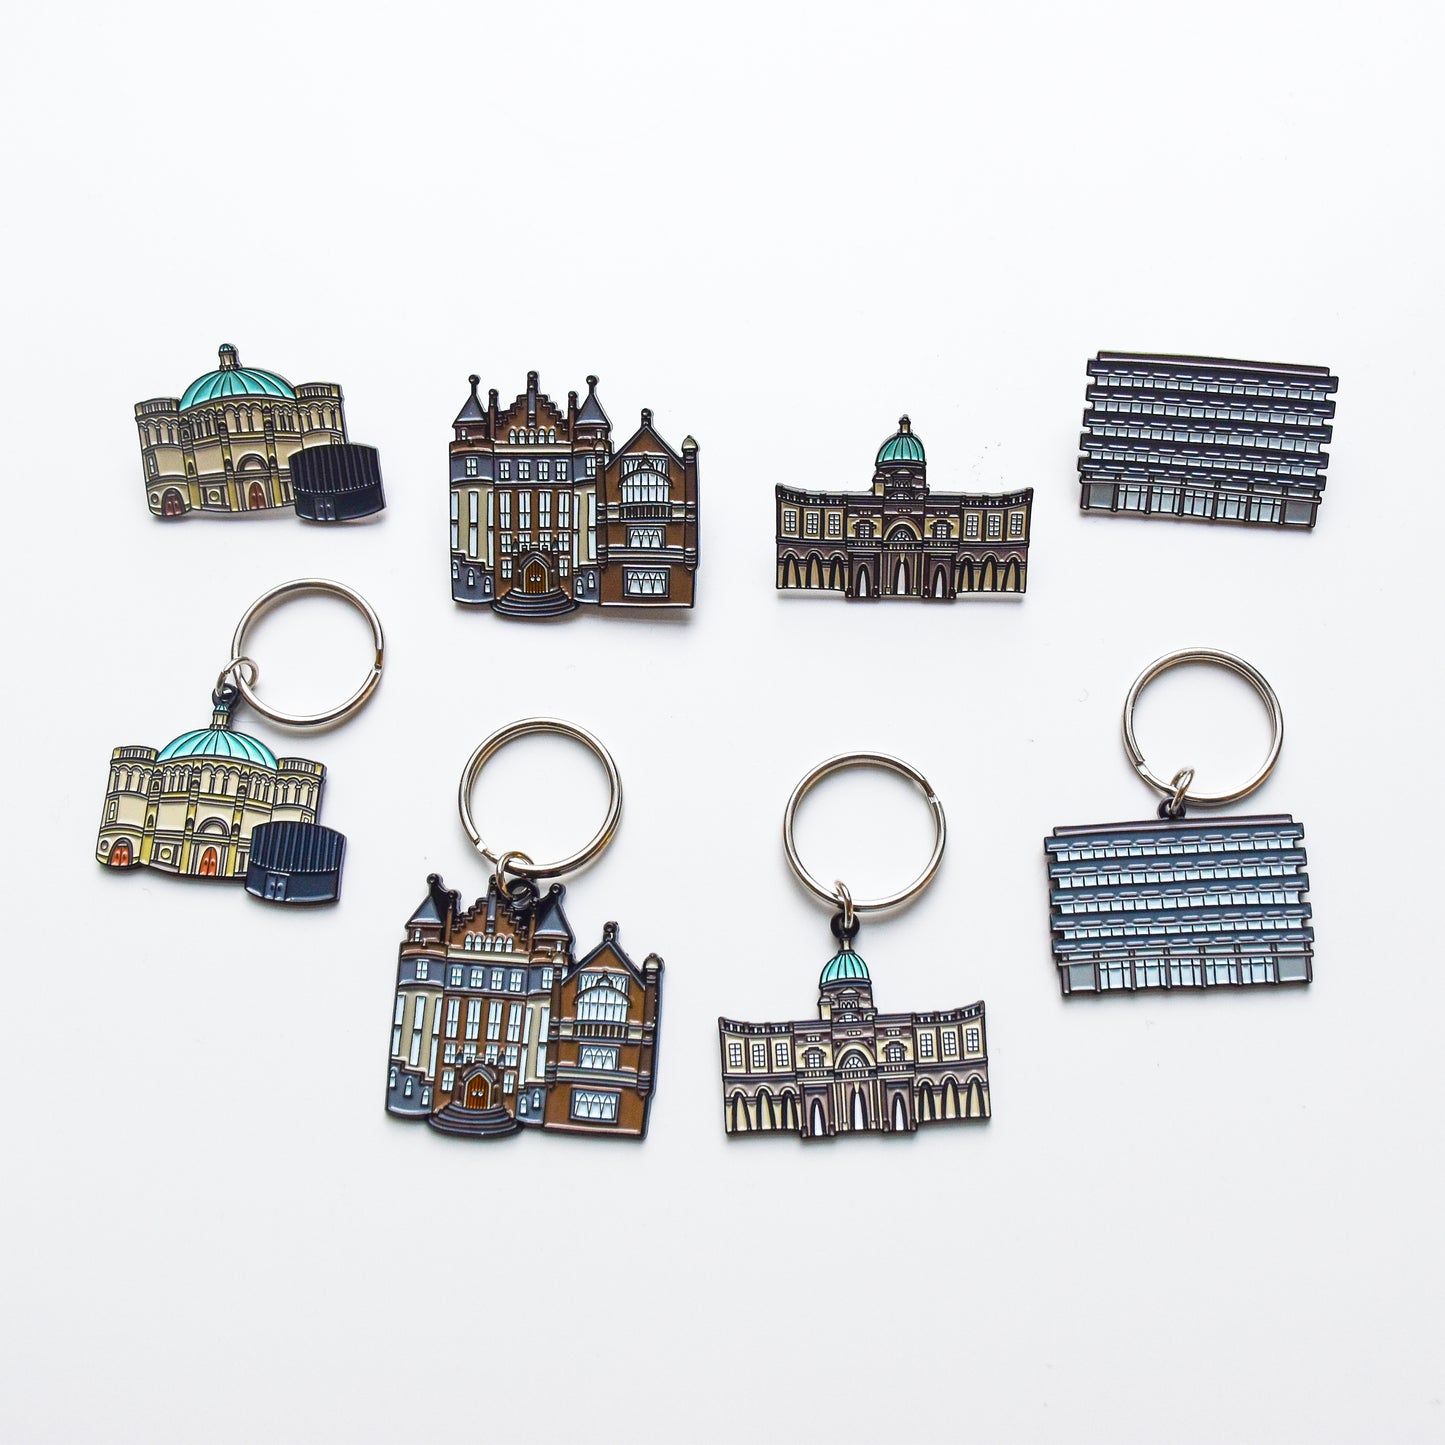 A selection of our Enamel Keyrings with their matching Enamel Pin counterparts. The deigns shown here are: Mc Ewan Hall, Teviot Row House, Old College and Main Library.